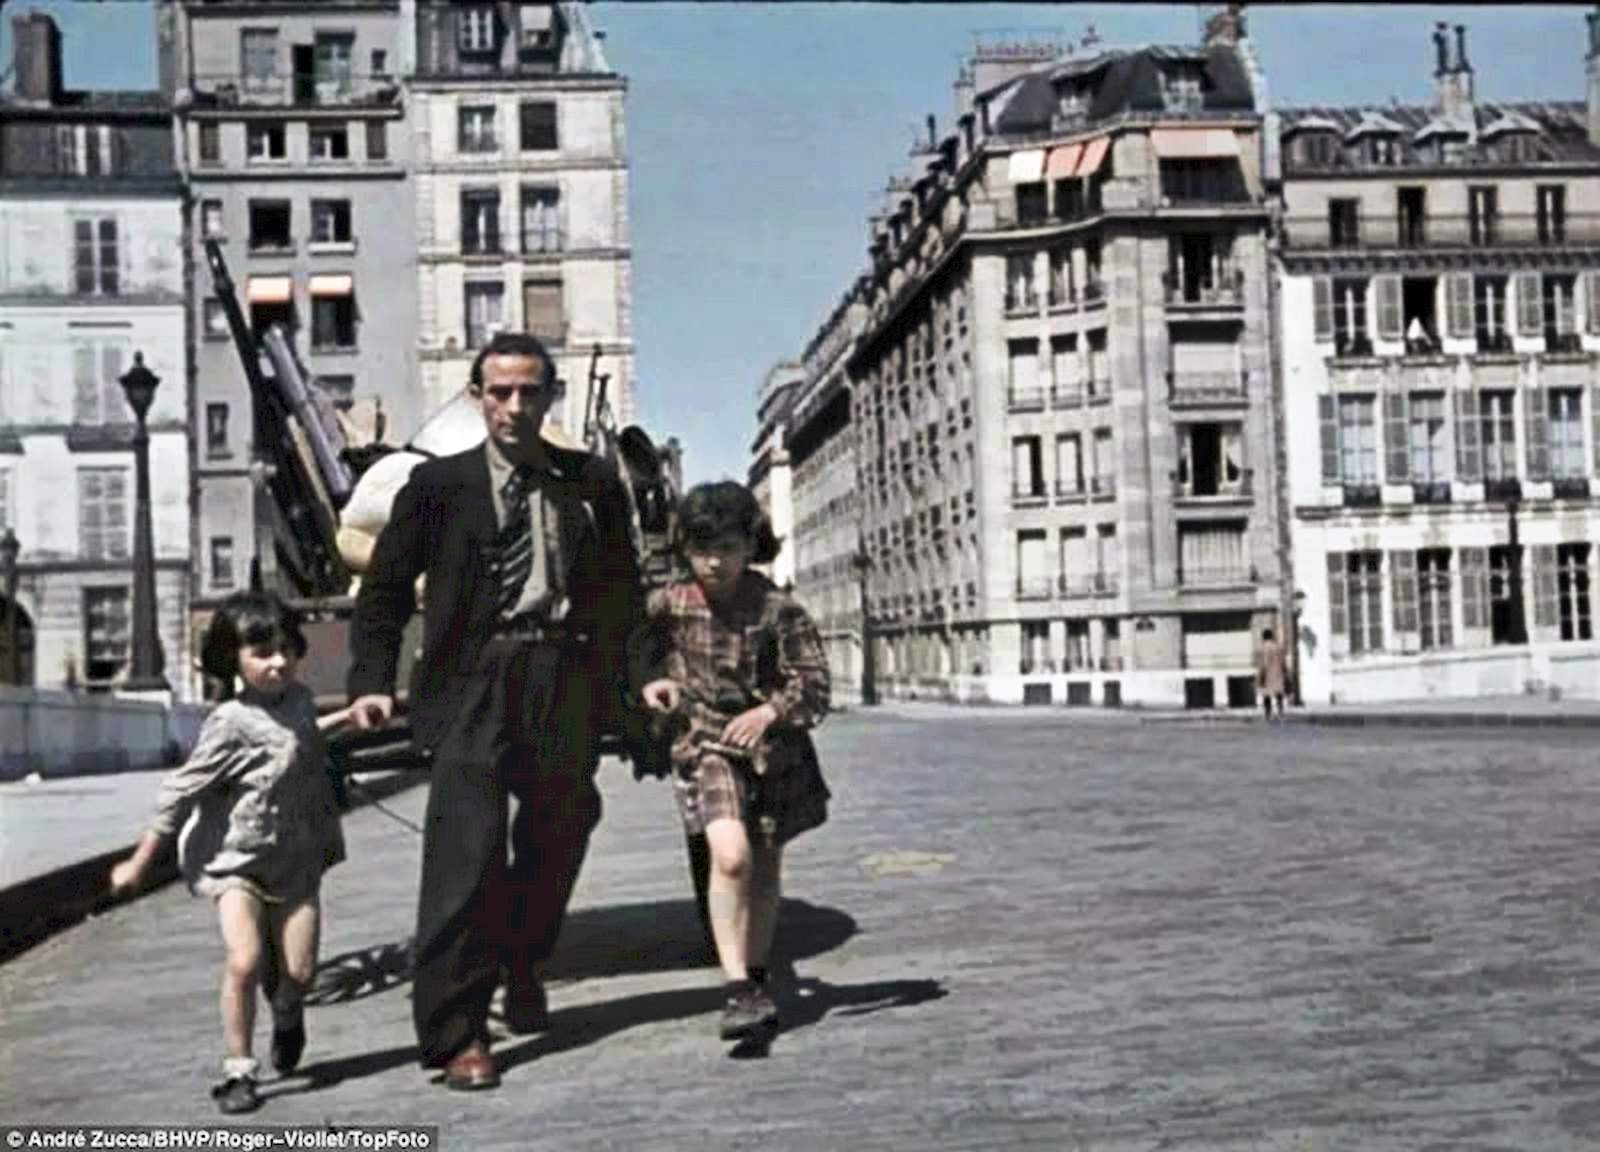 A harried-looking man with two scruffily dressed girls drags a cart through the streets of Paris.